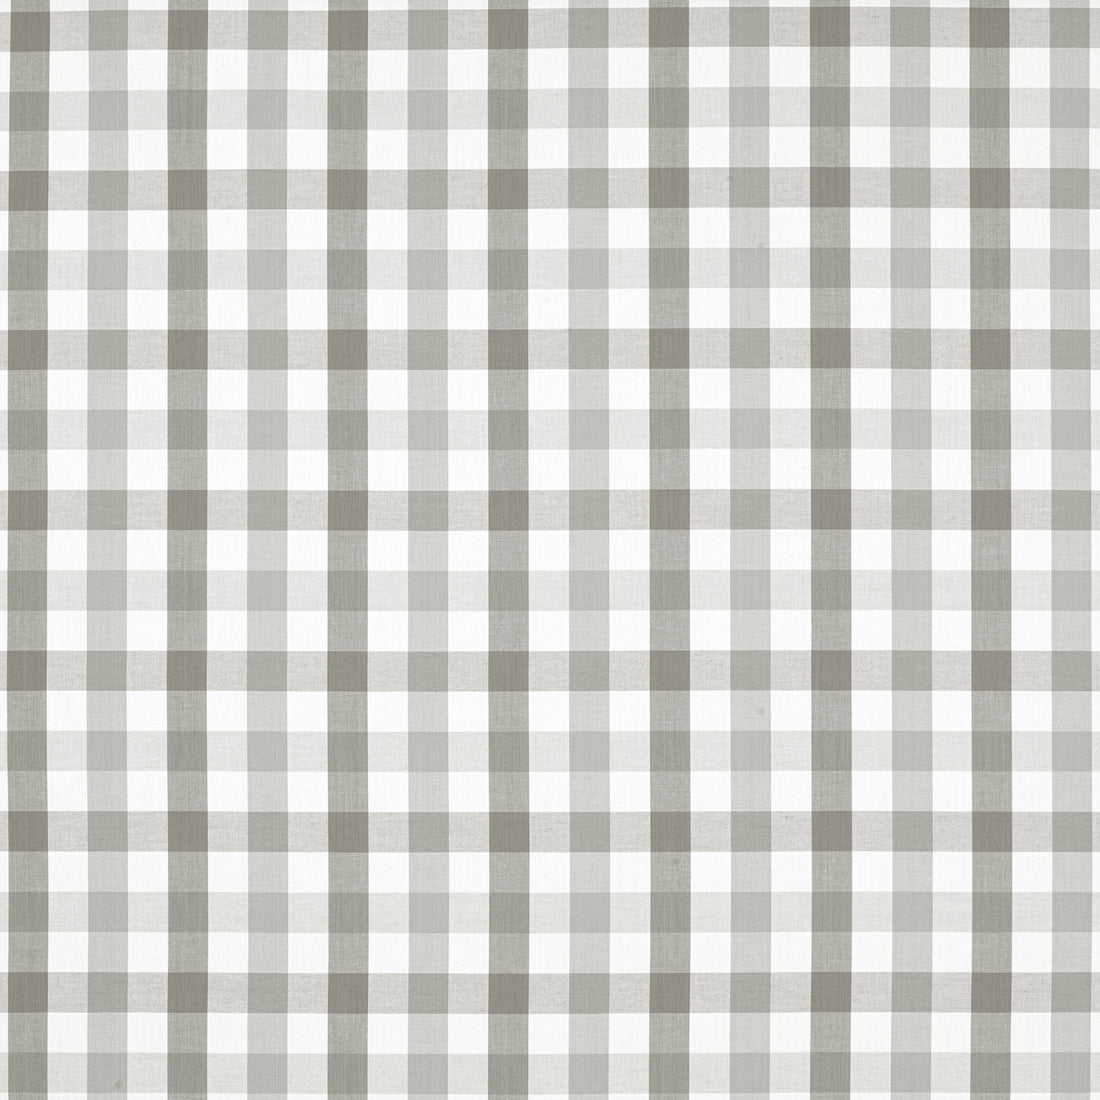 Saybrook Check fabric in grey color - pattern number AW15152 - by Anna French in the Antilles collection